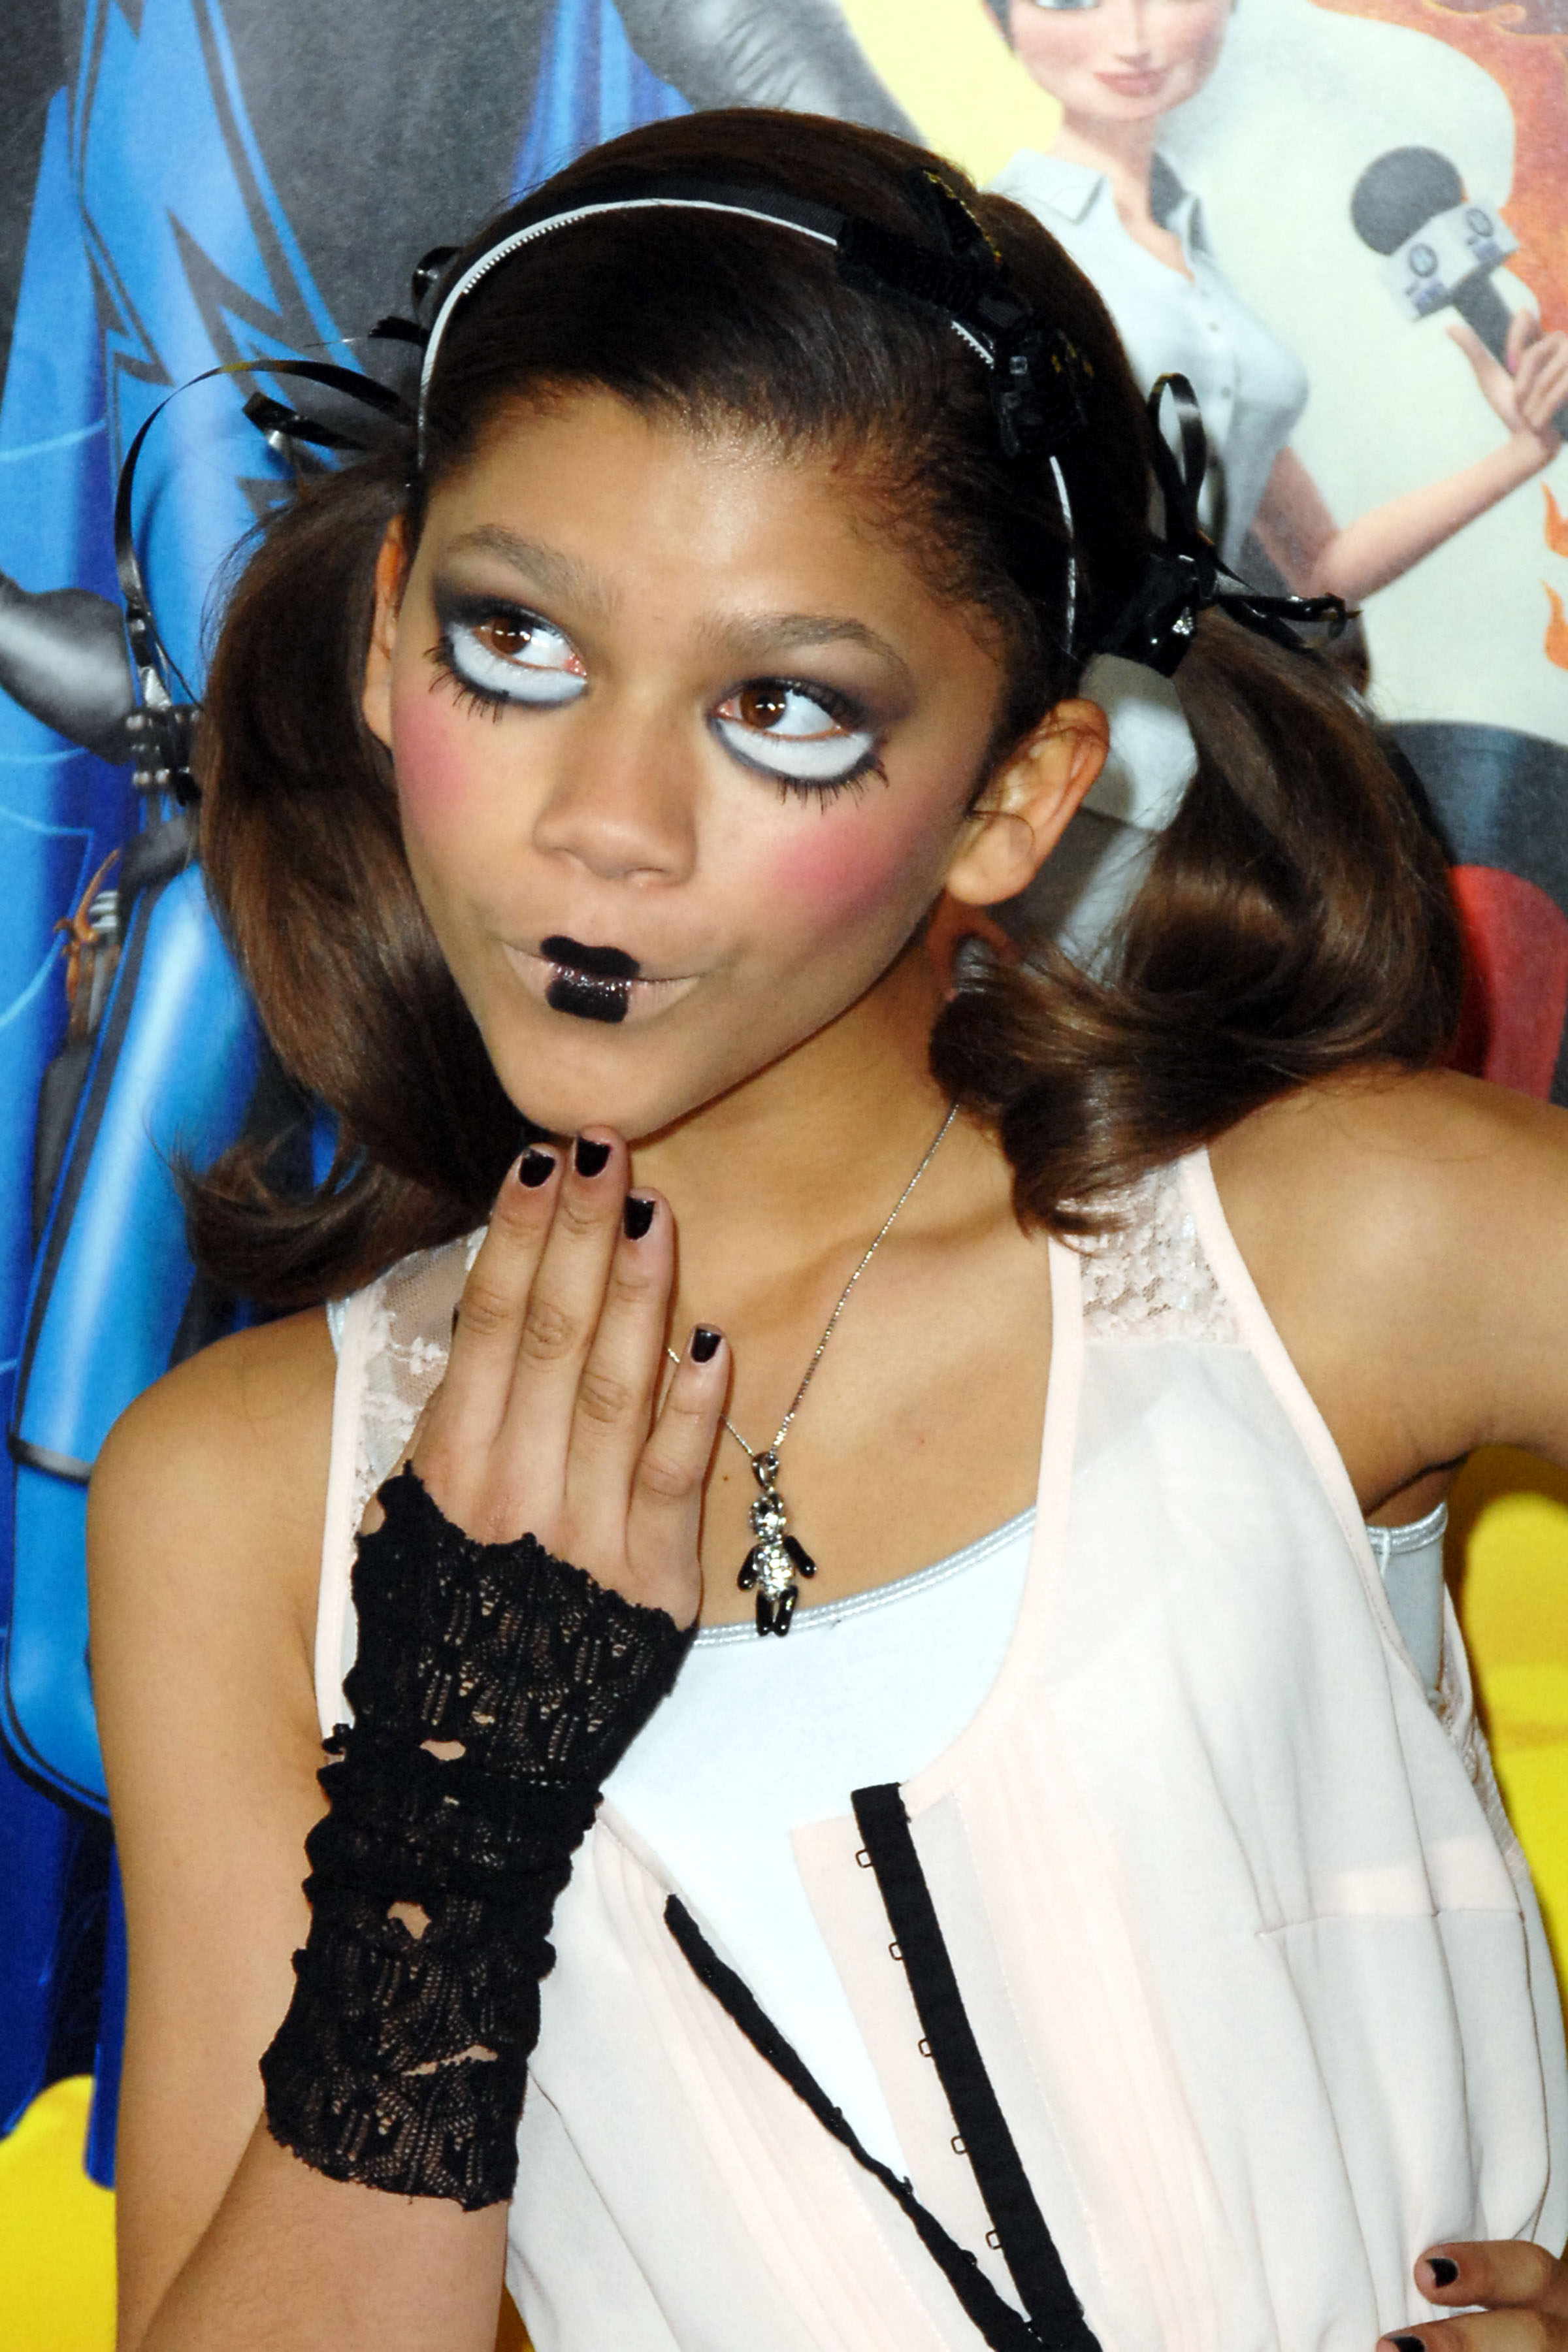 Zendaya Coleman attends Los Angeles Premiere of Megamind at Mann's Chinese Theatre in Hollywood, California, on October 30, 2010. | Source: Getty Images